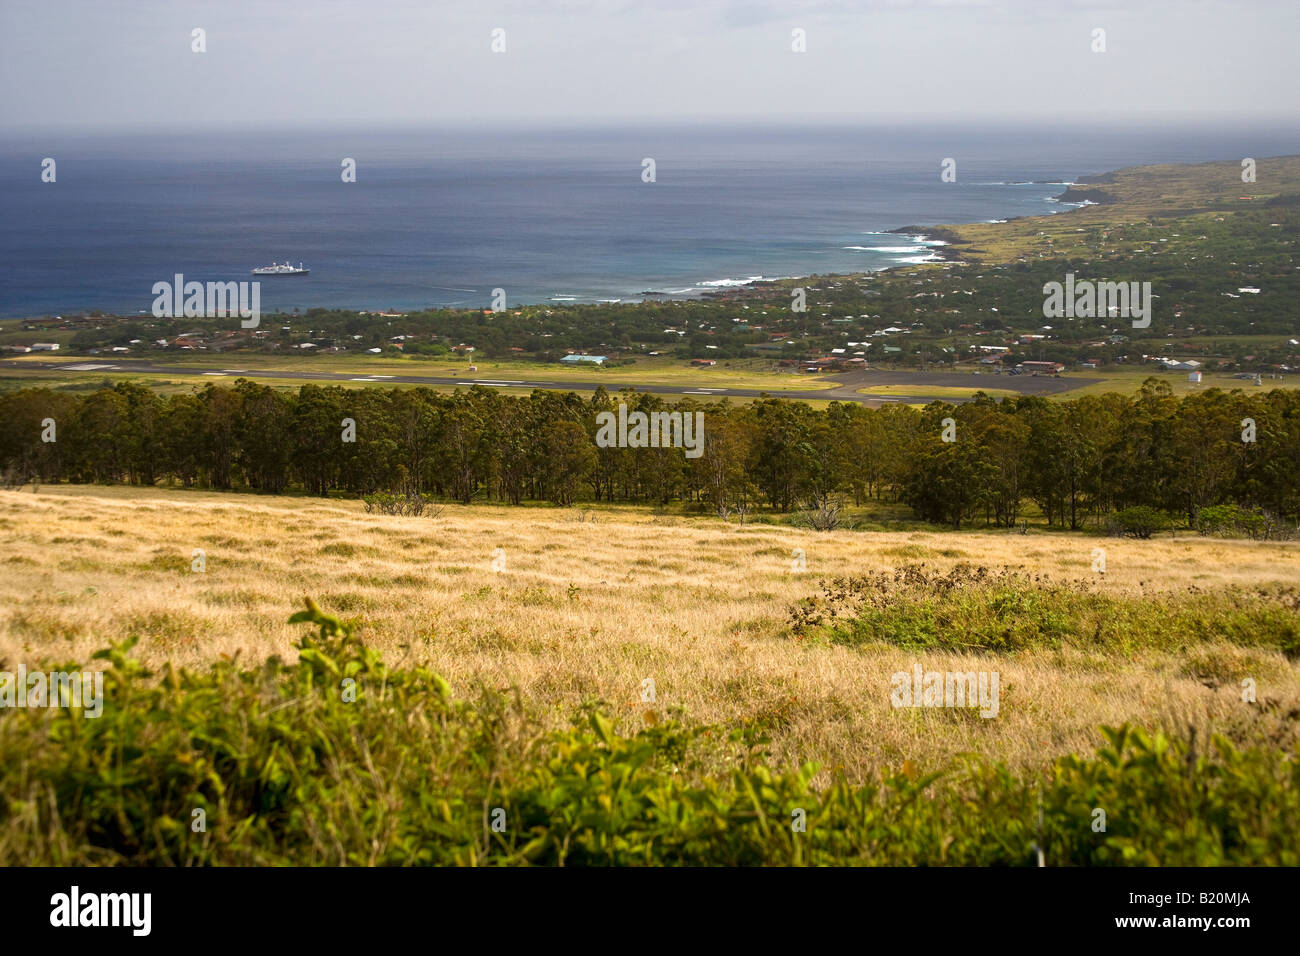 Aerial view of coastline and airport Easter Island Stock Photo